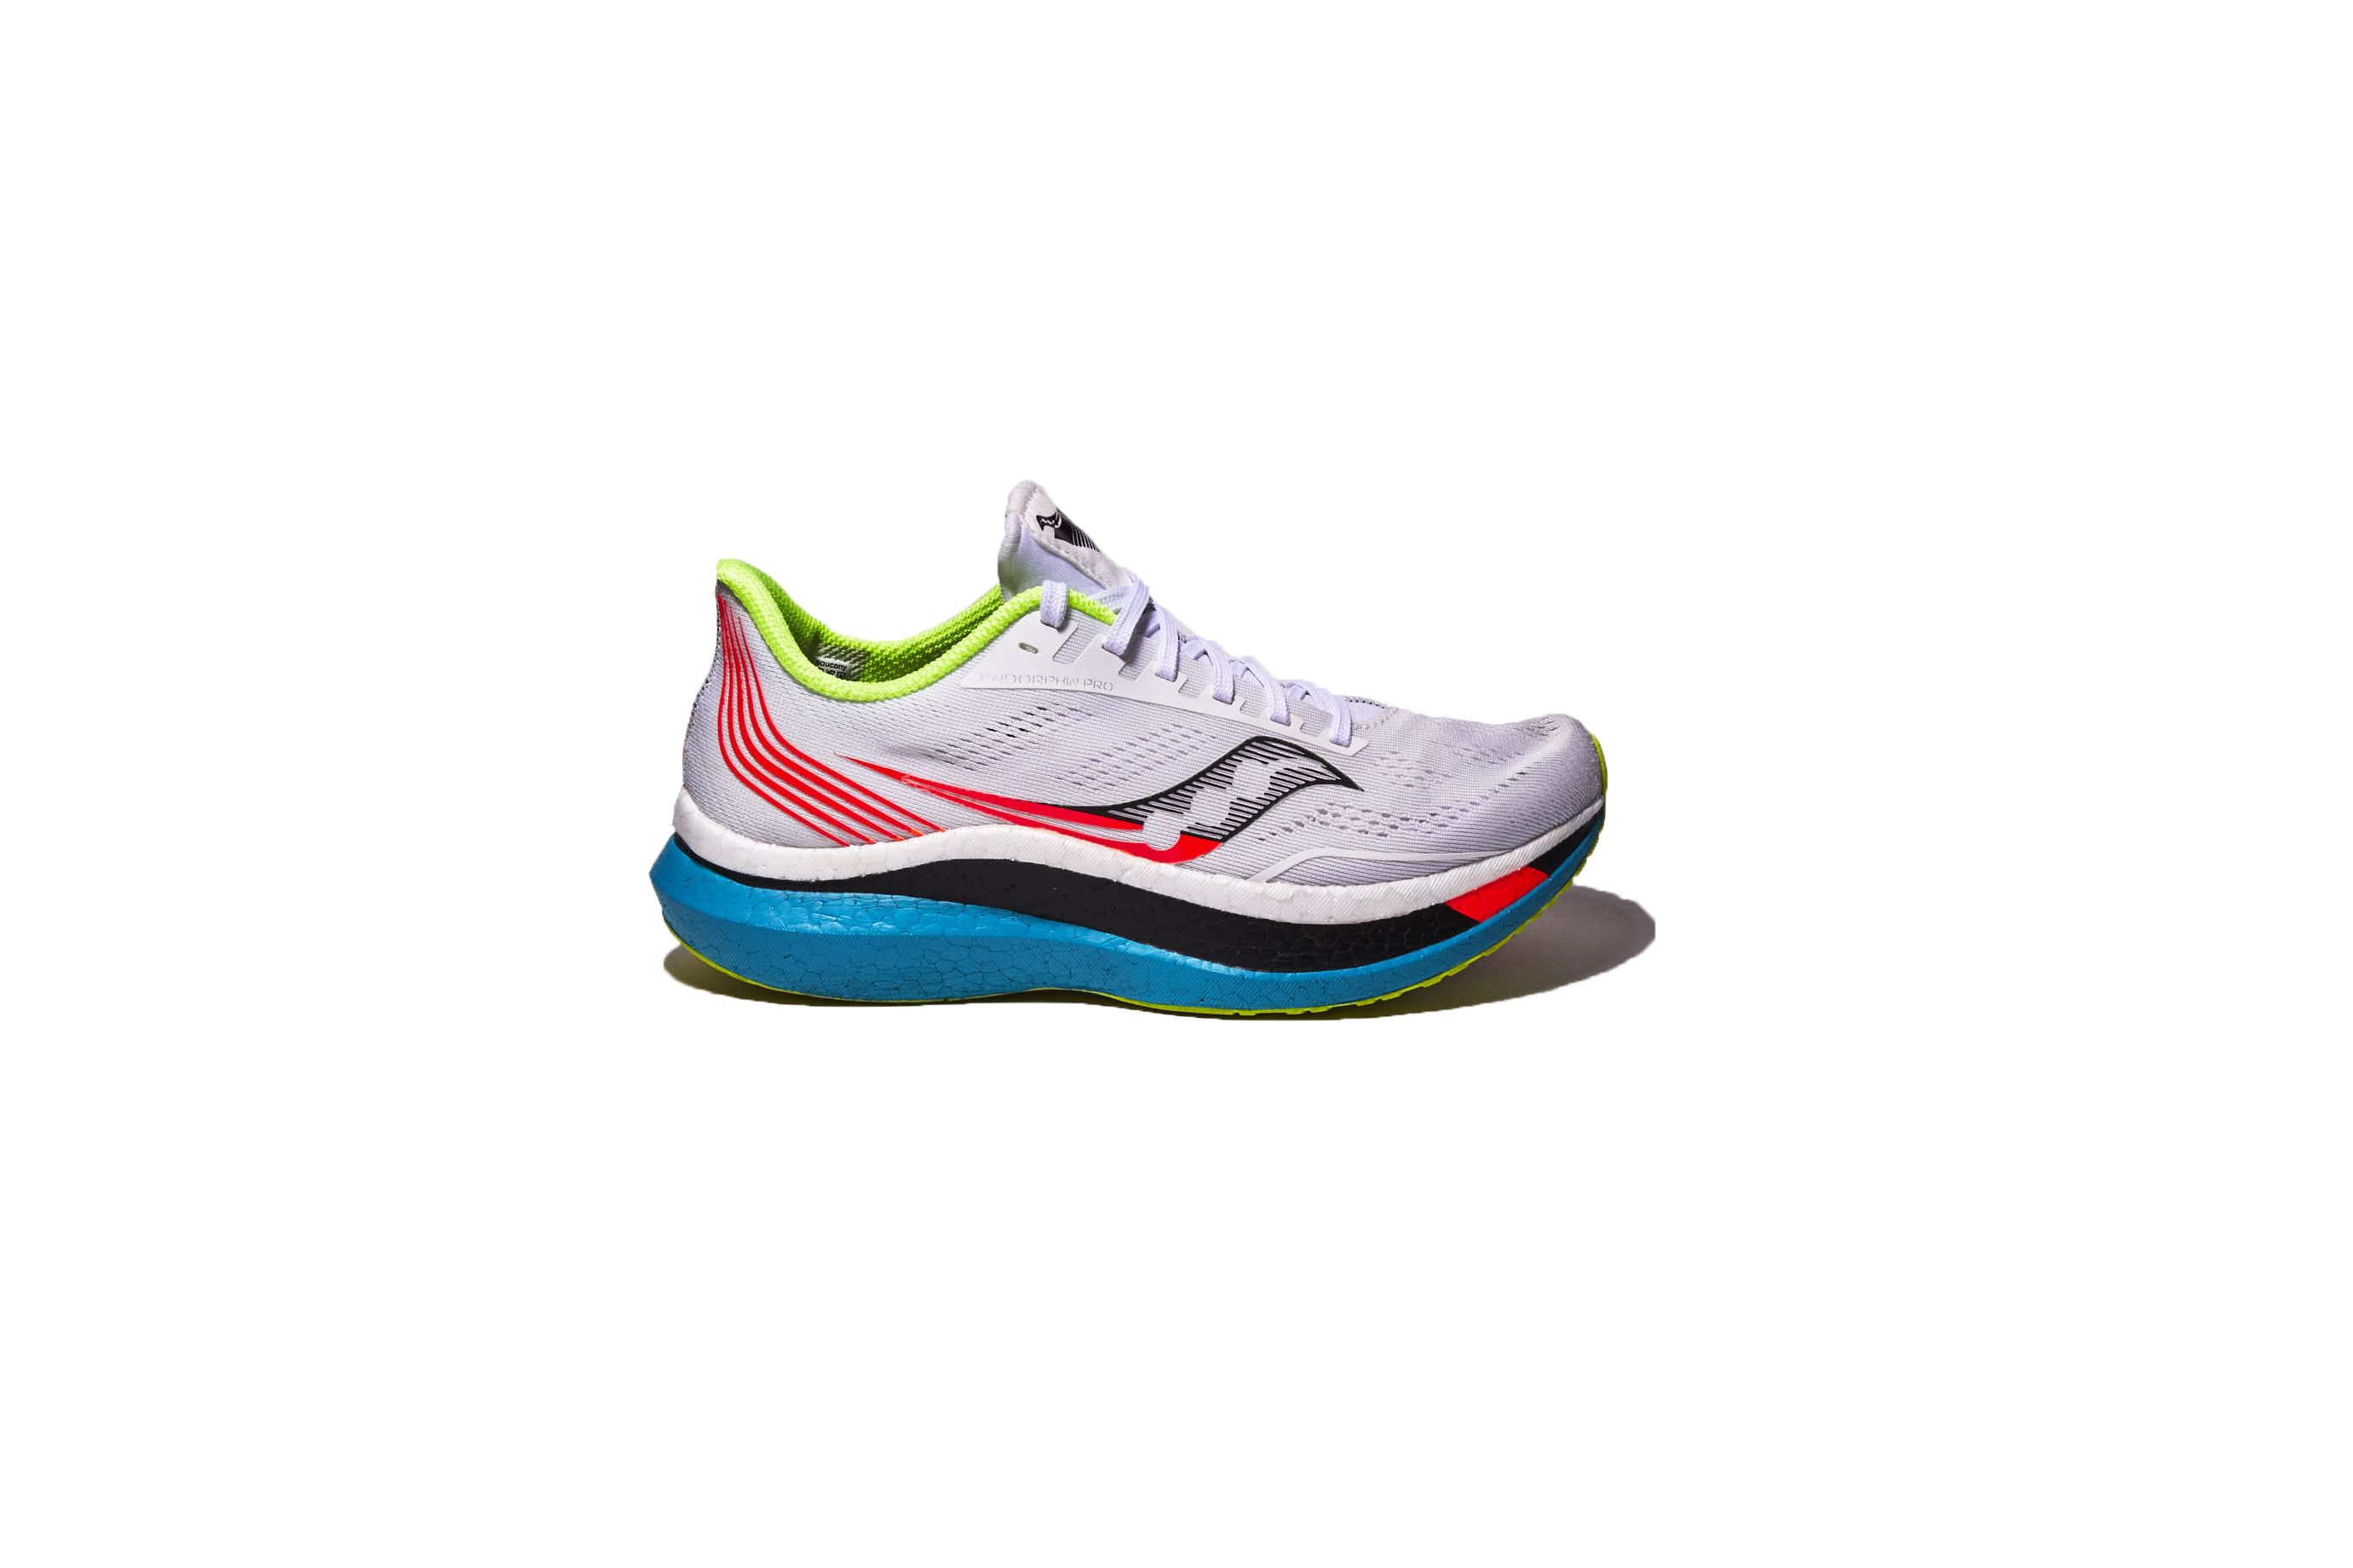 liberty running shoes price